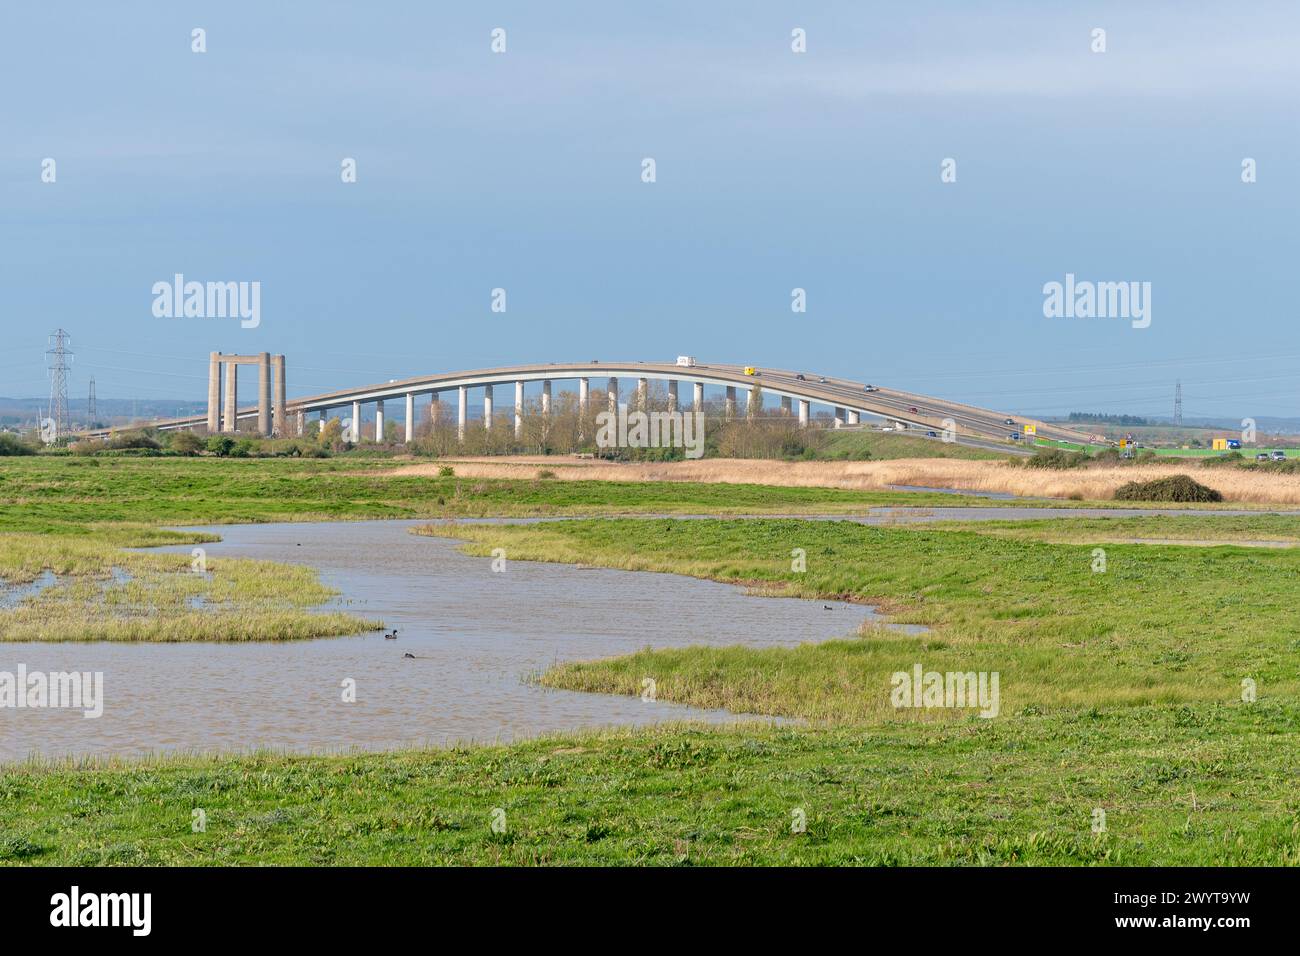 The Sheppey Crossing, a road bridge connecting the Isle of Sheppey to mainland Kent, England, UK Stock Photo